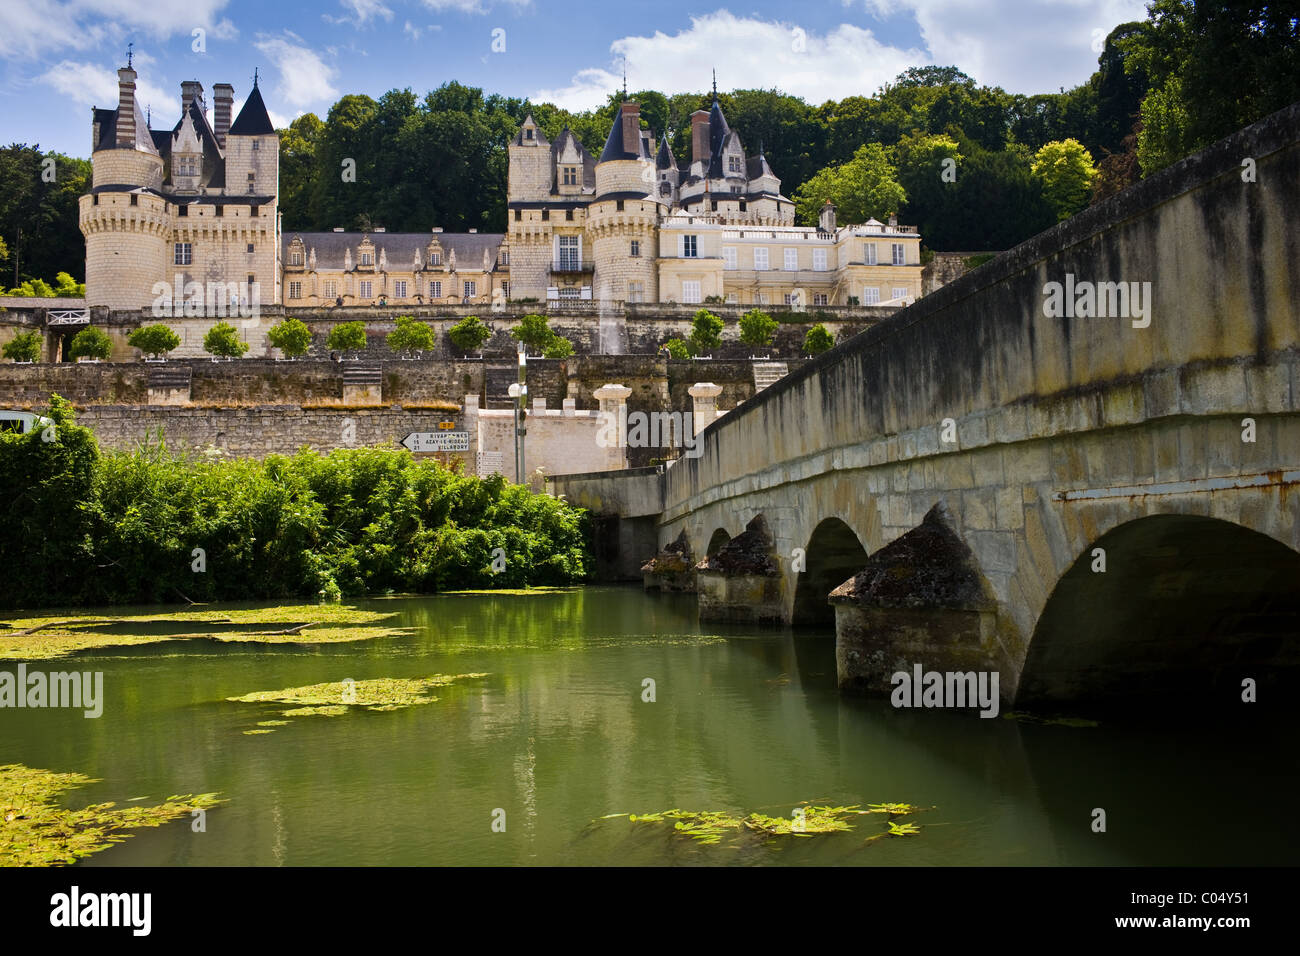 Chateau d'Usse at Rigny Usse from across the Indre River in the Loire Valley, France Stock Photo